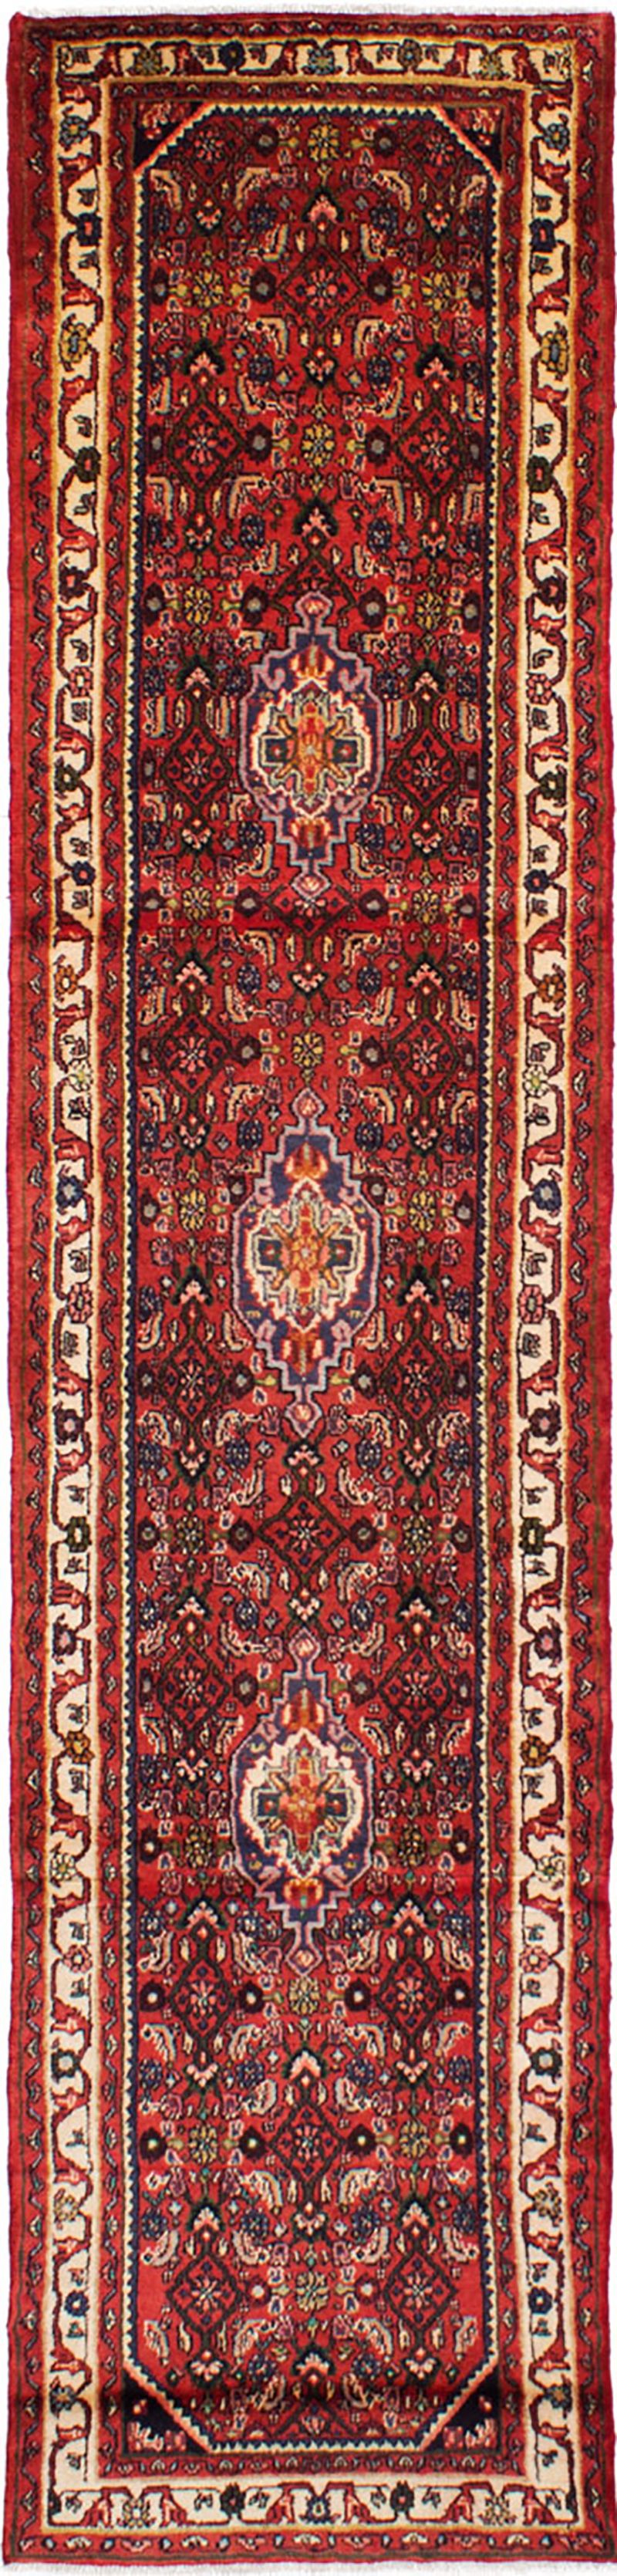 Hand-knotted Hosseinabad Red Wool Rug 2'6" x 10'10" Size: 2'6" x 10'10"  